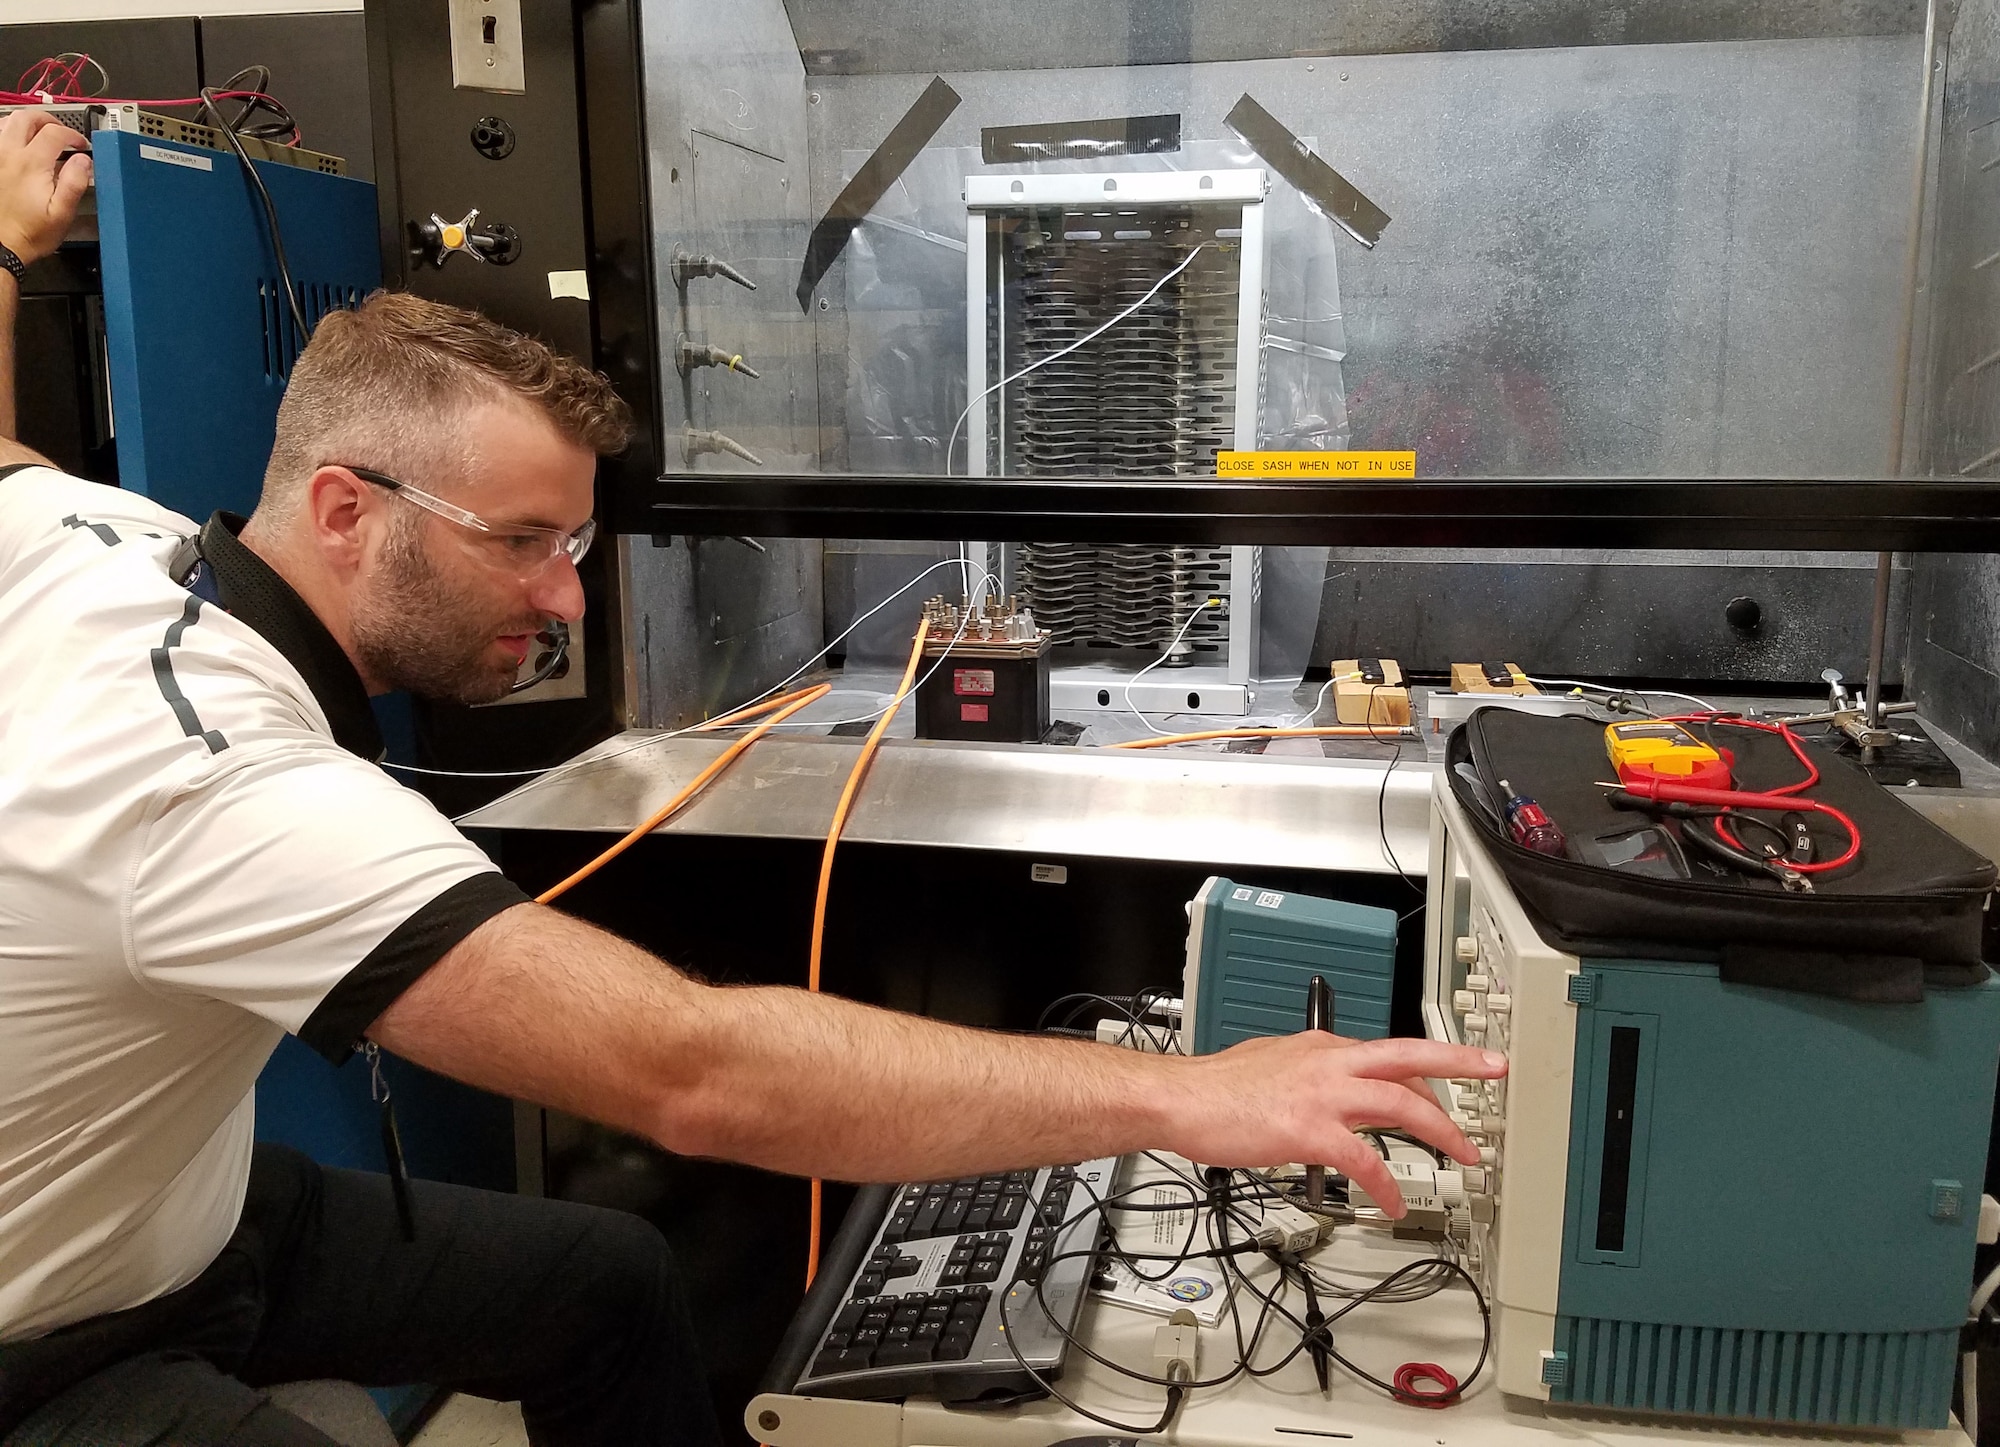 Air Force Research Laboratory electrical engineer Corey Boltz makes final adjustments before conducting a proof-of-concept arc test in preparation for follow-up testing to support a NASA research effort. (U.S. Air Force Photo/Holly Jordan)